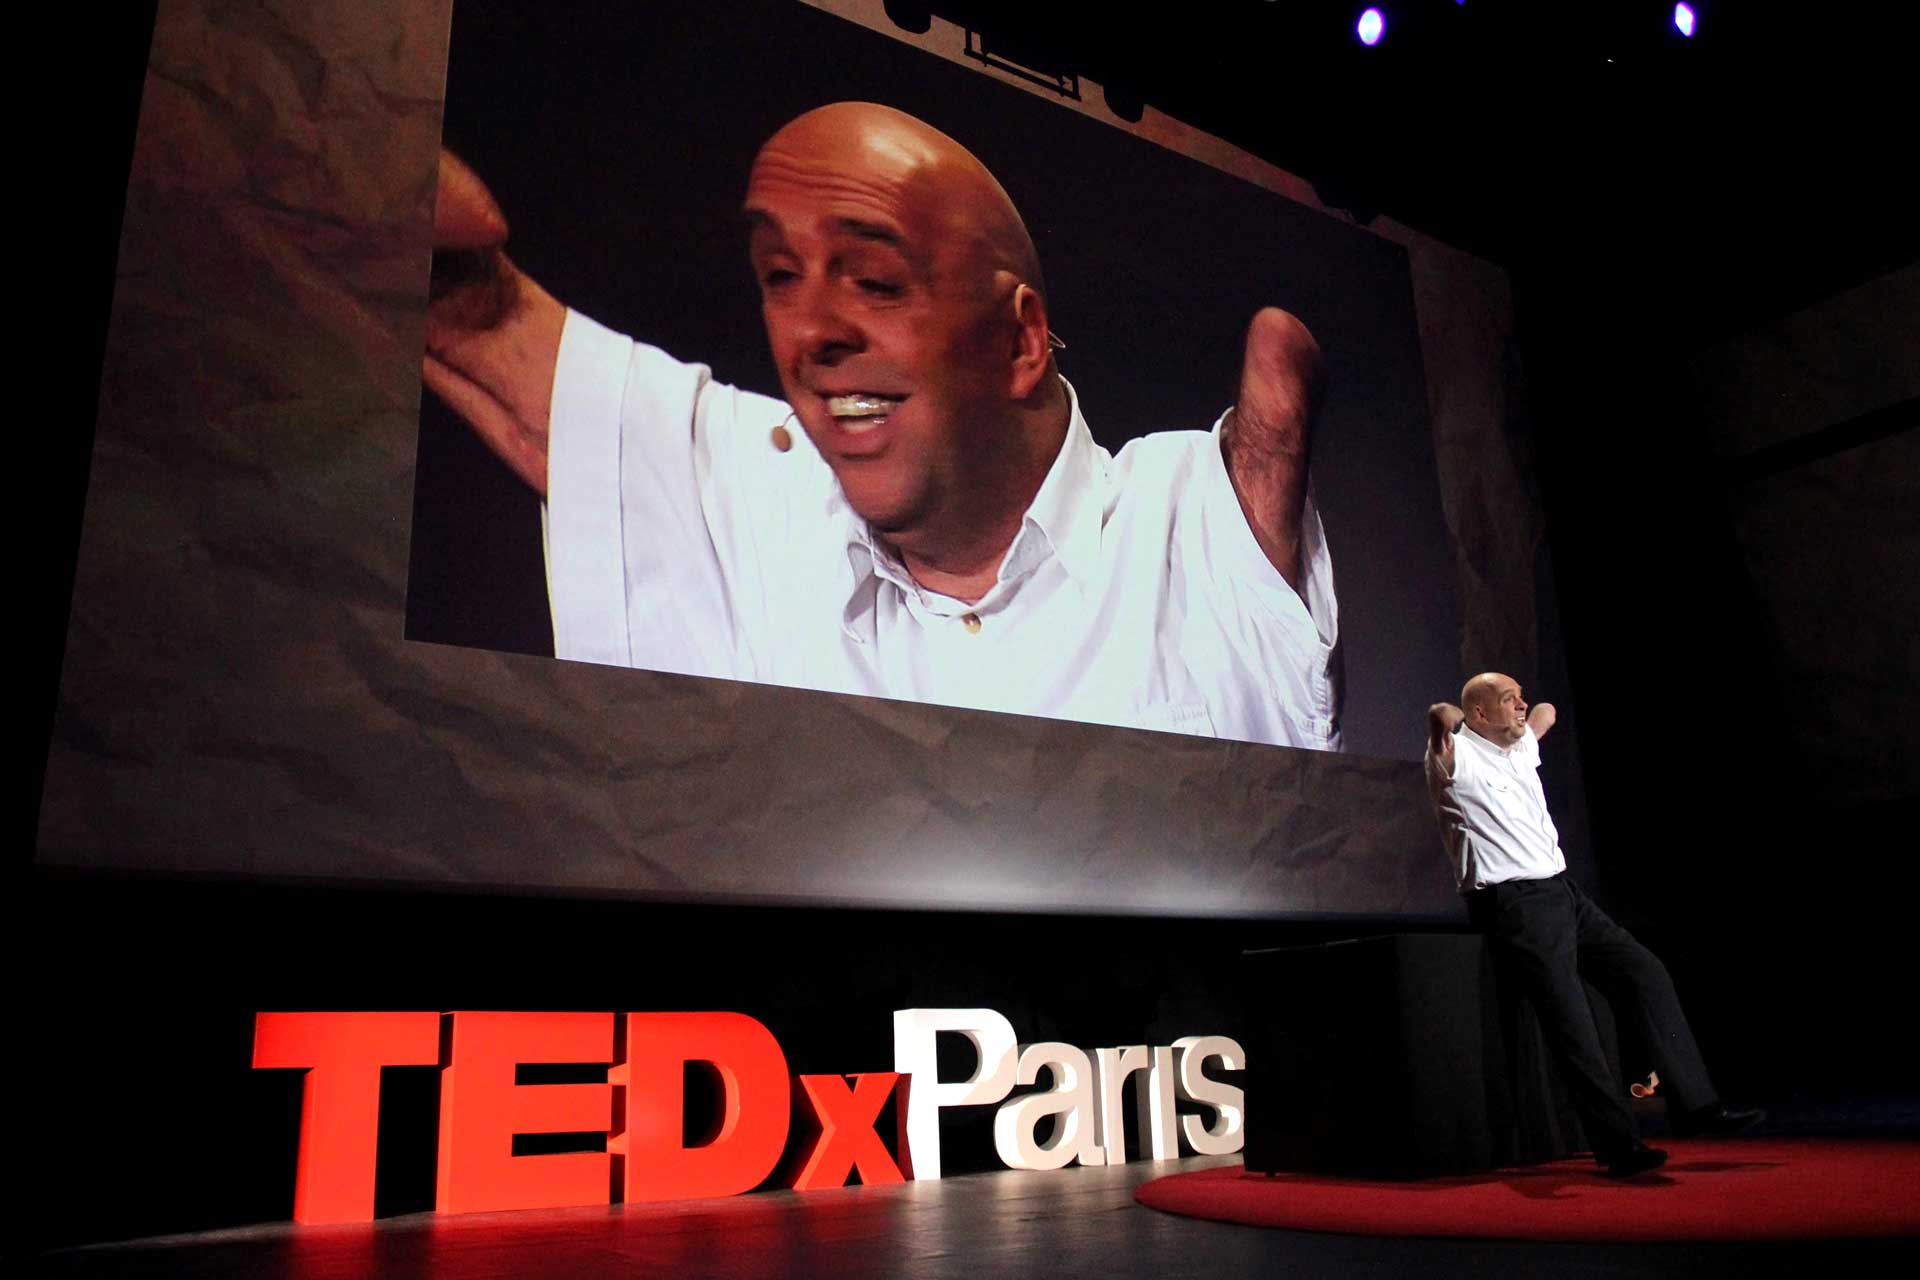 conference-TEDxParis-2013-14.jpg